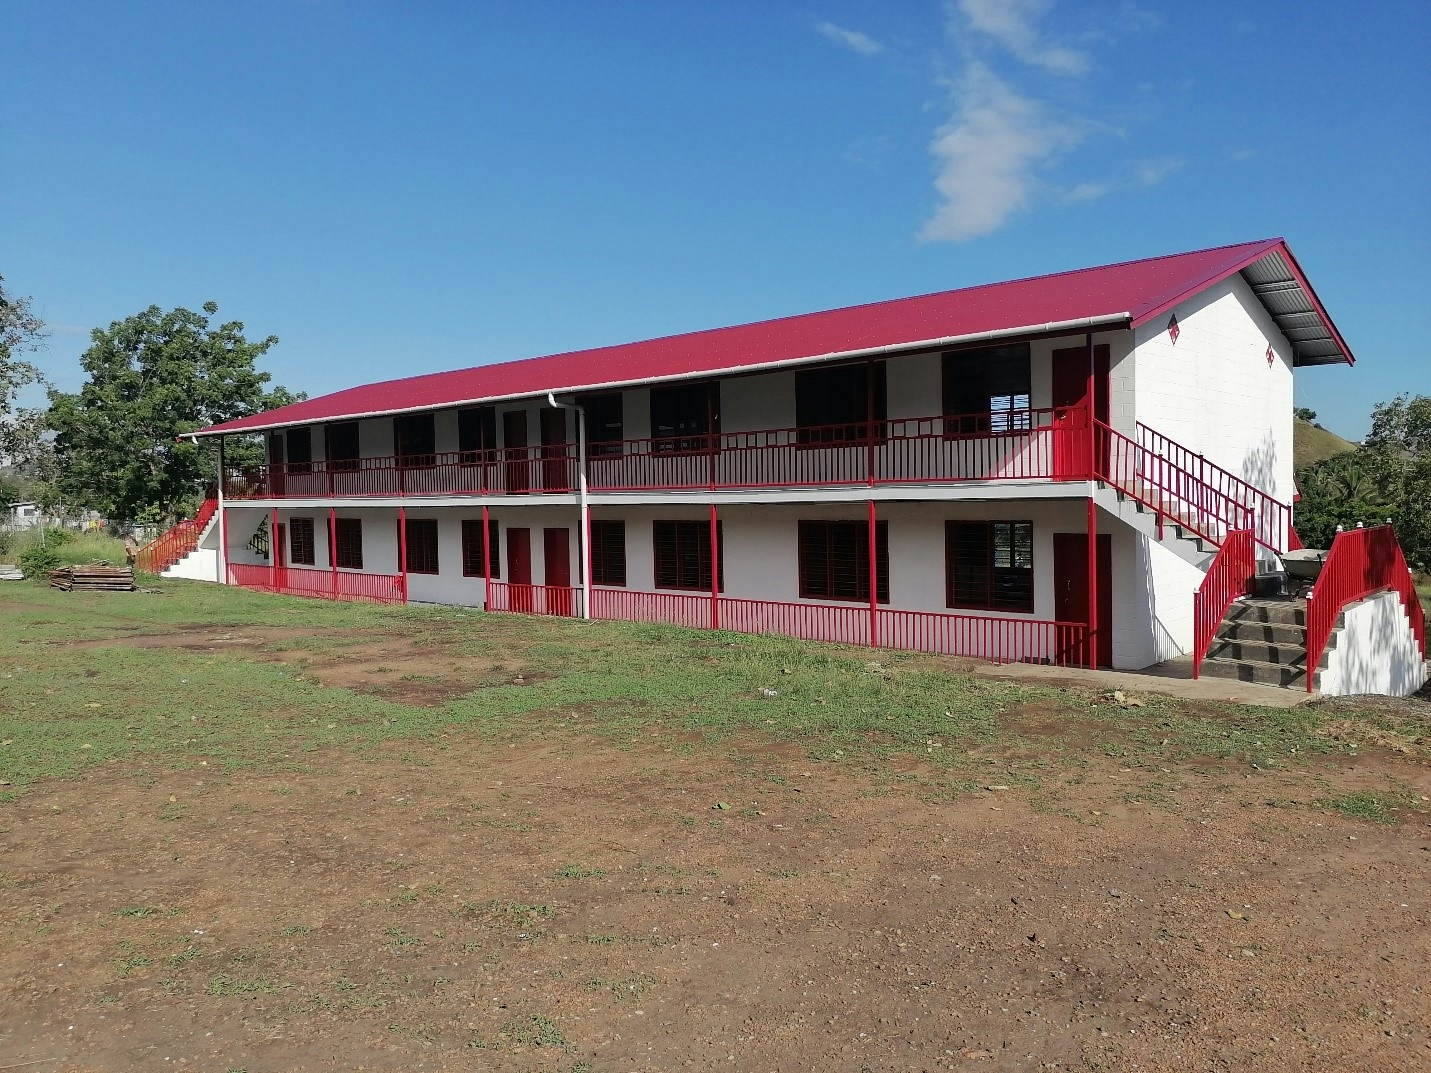 A school building, with white walls and a red roof